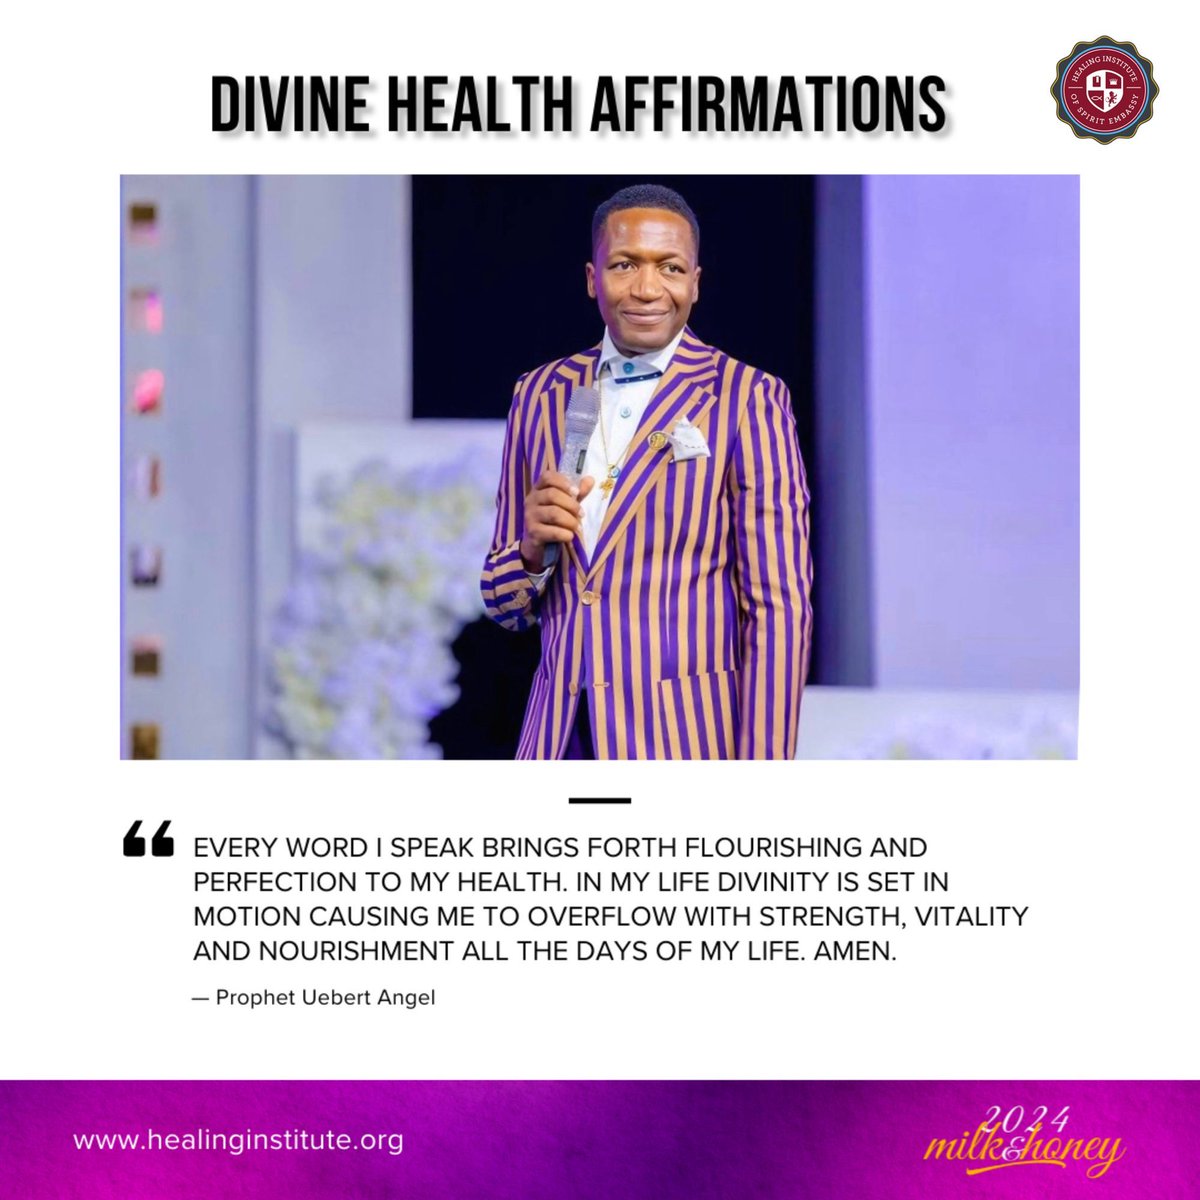 Every word I speak brings forth flourishing and perfection to my health. In my life divinity is set in motion causing me to overflow with strength, vitality and nourishment all the days of my life. Amen. #uebertangel #healinginstitute #healing #milkandhoney #affirmation